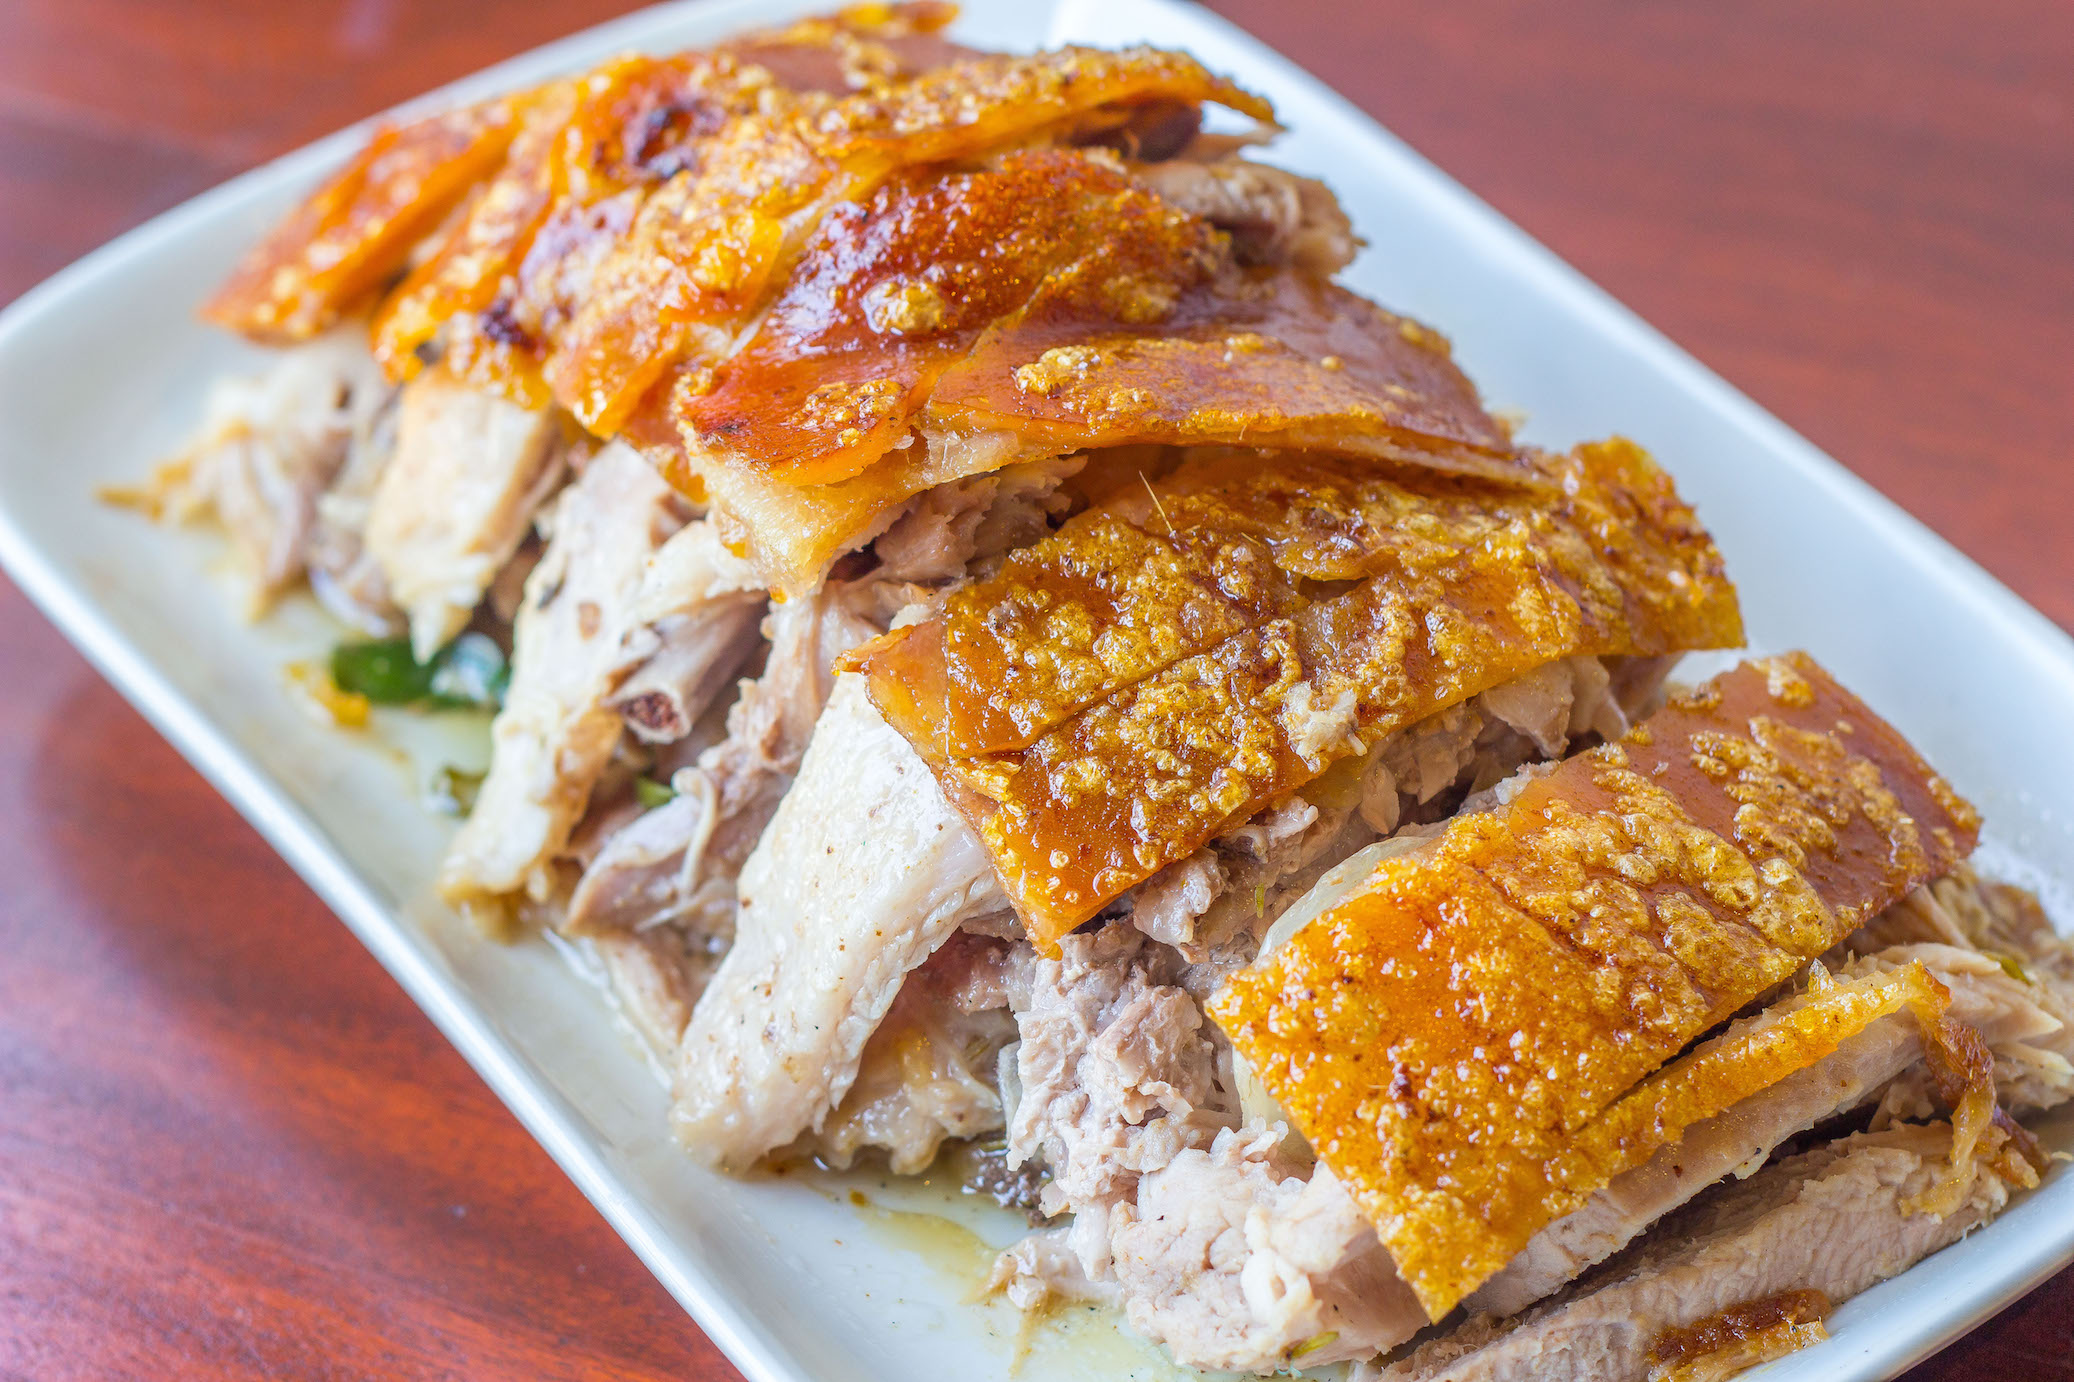 Zubuchon’s famous lechon (roasted pig) is now available in Makati City. PHOTO: Ching Dee